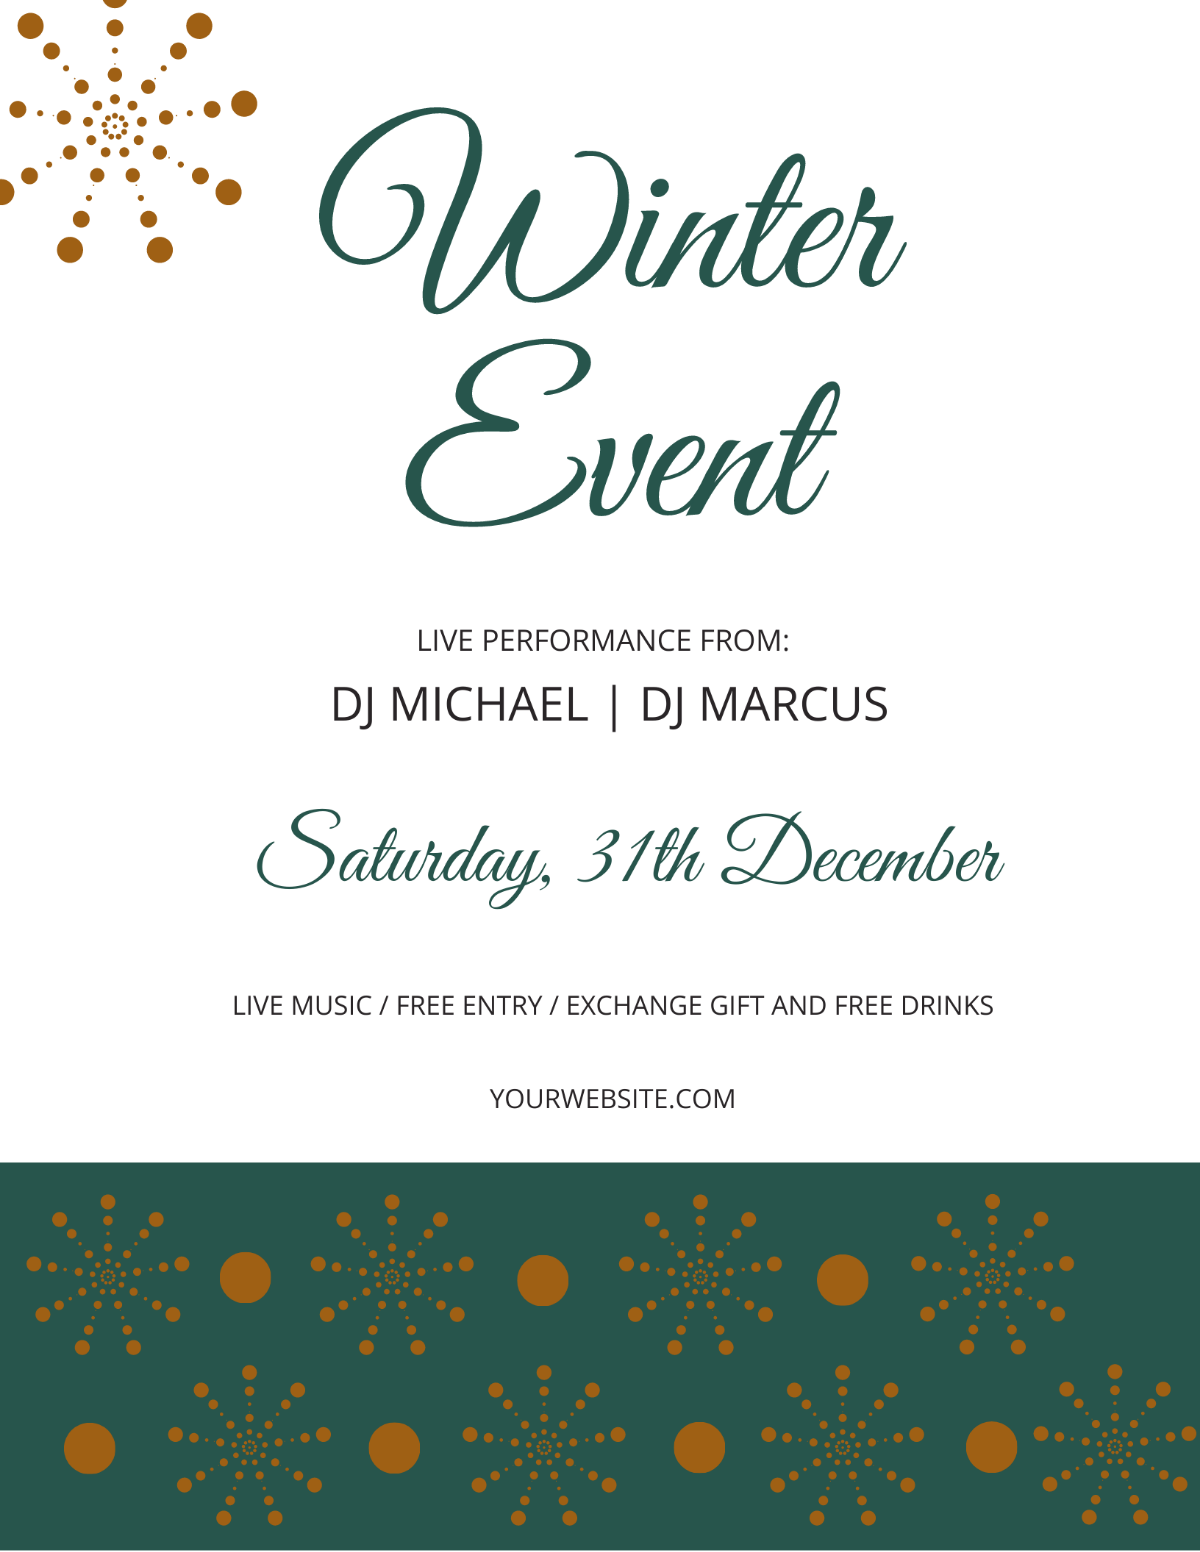 Winter Events Flyer Template